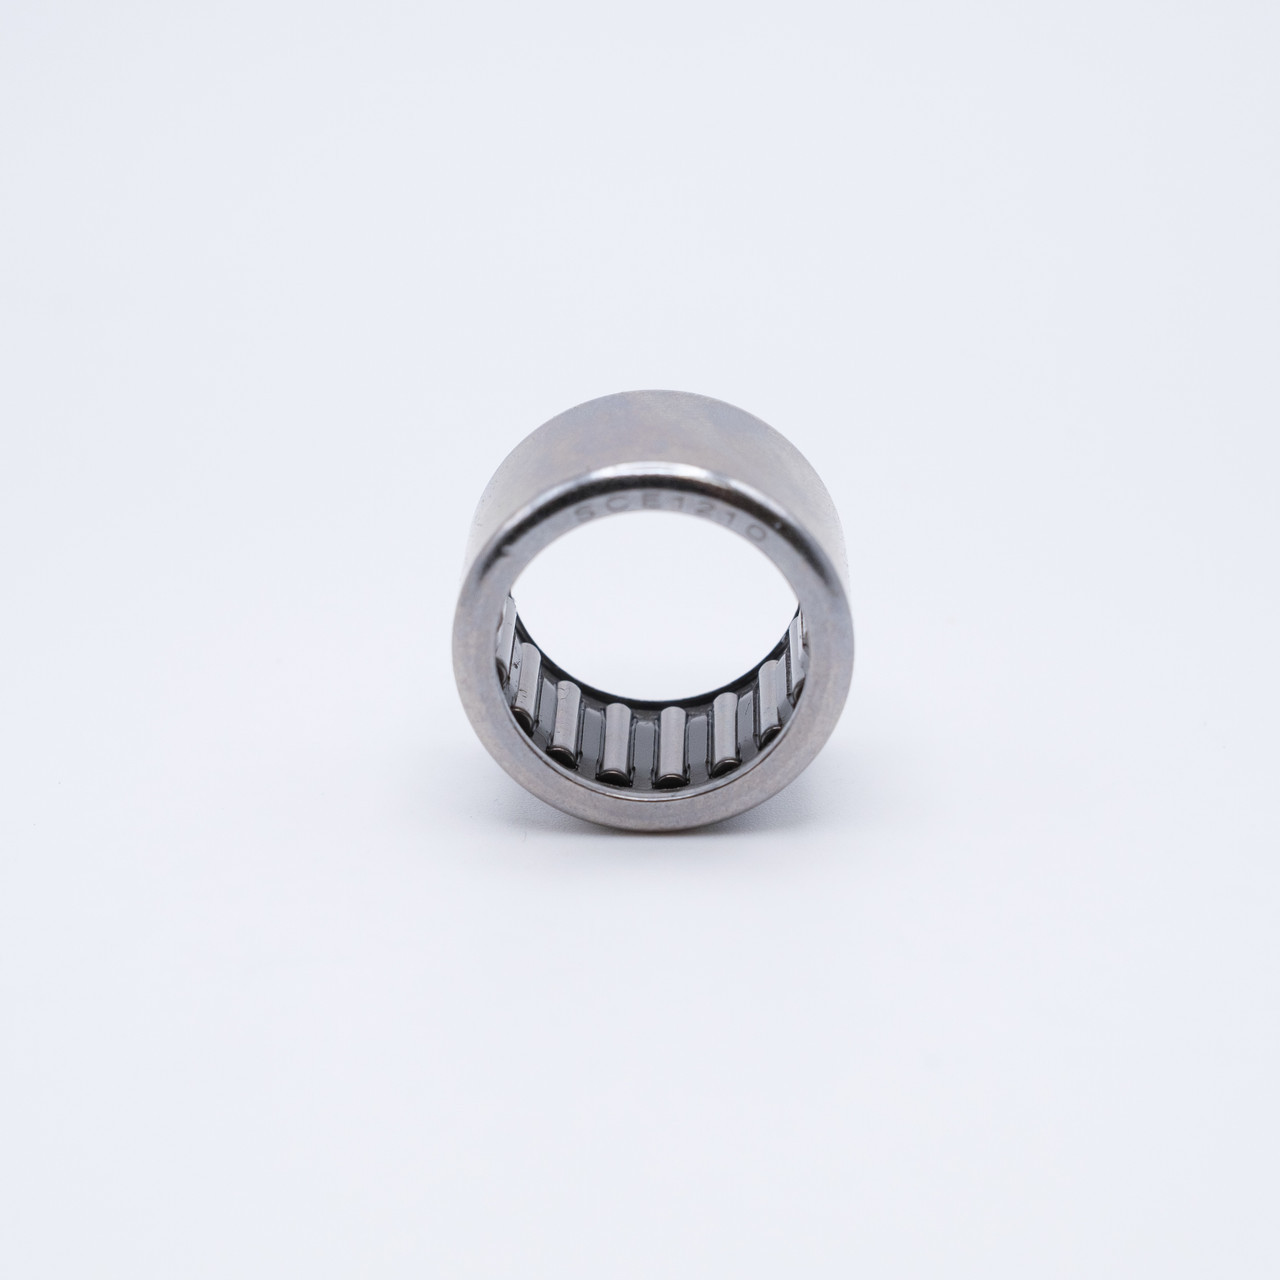 BA710ZOH Needle Roller Bearing 7/16x5/8x5/8 Front View